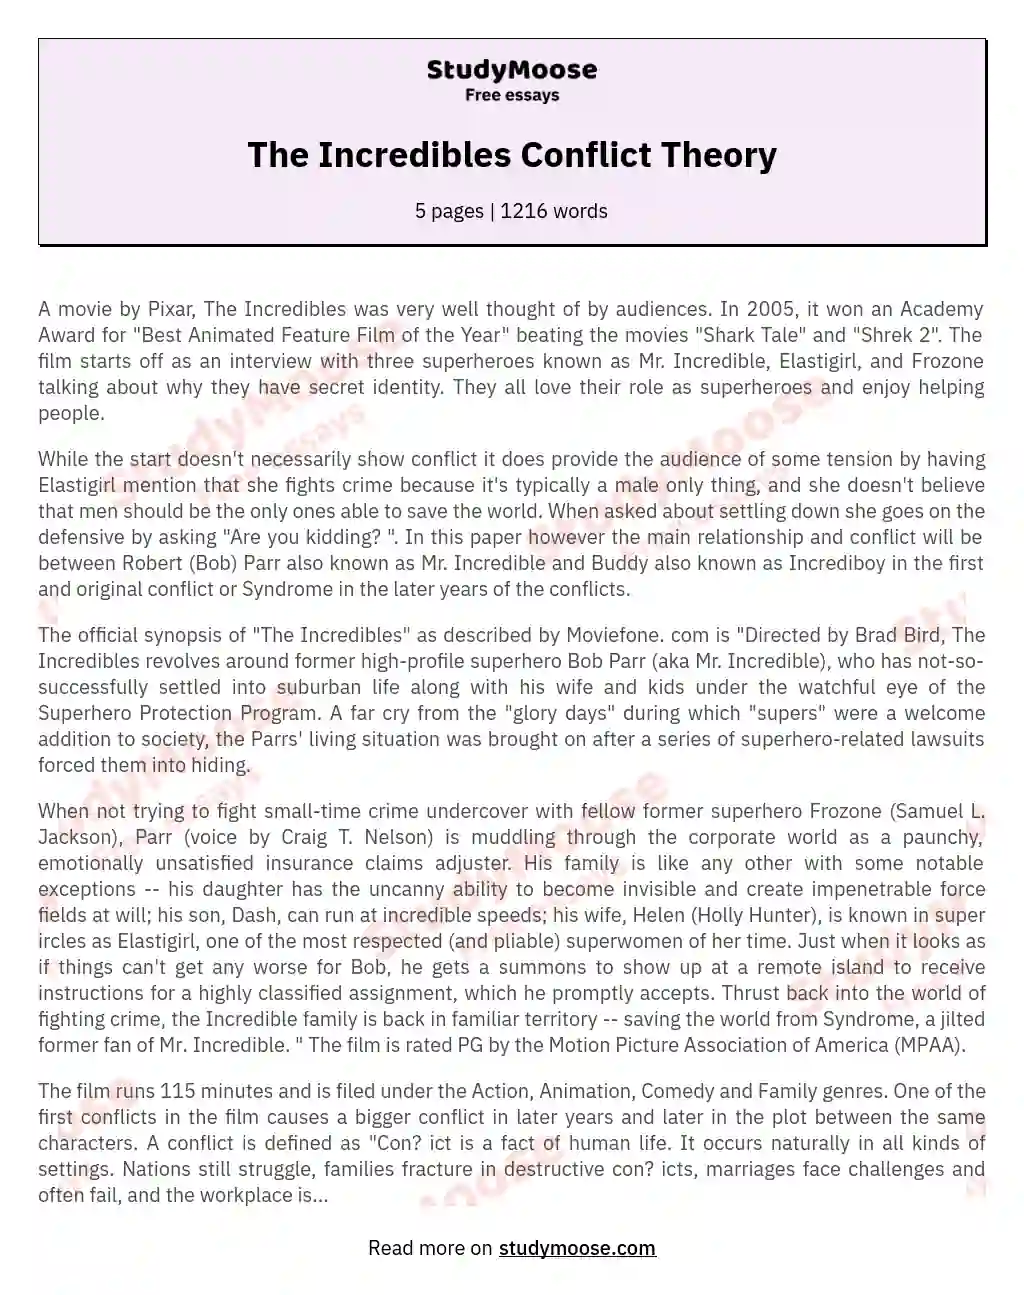 The Incredibles Conflict Theory essay